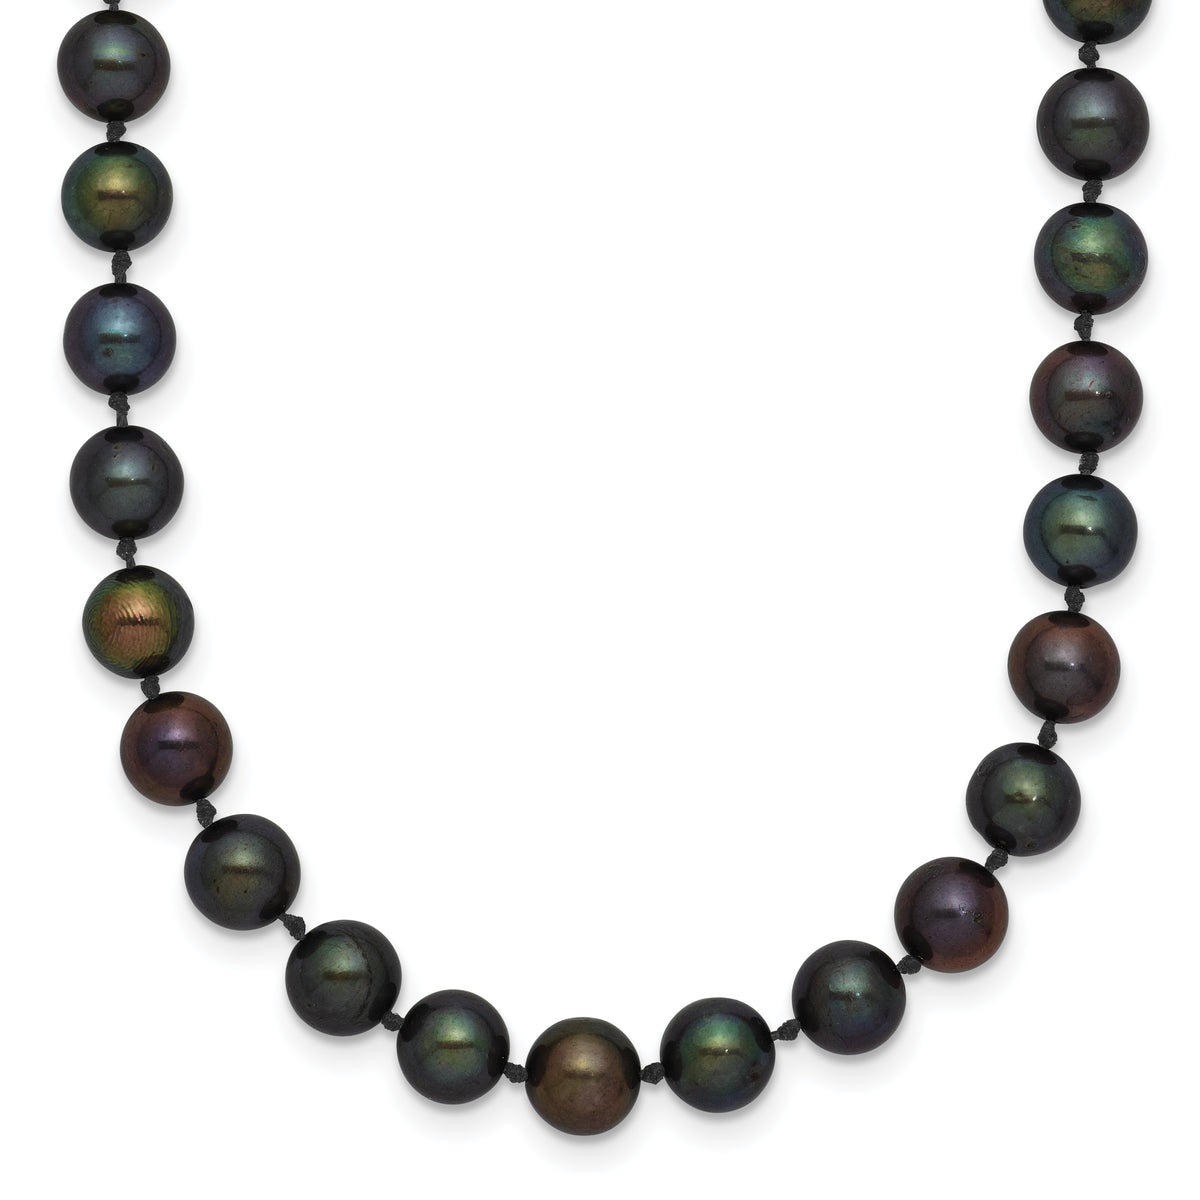 14k 5-6mm Black Near Round Freshwater Cultured Pearl Necklace